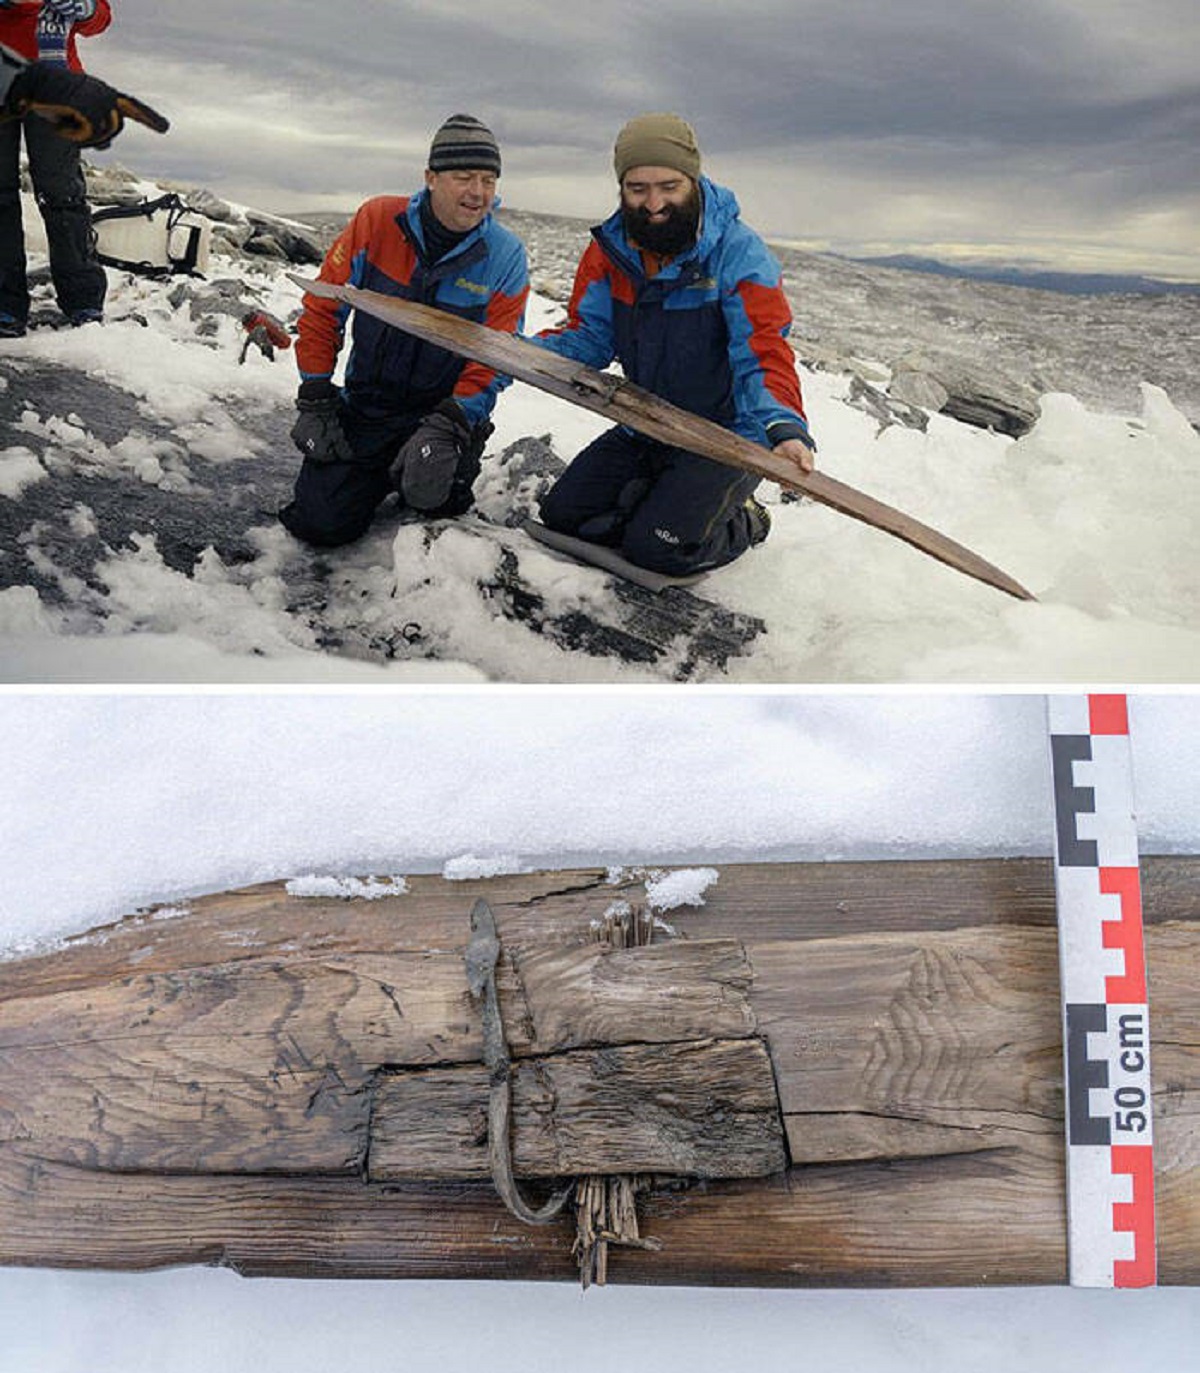 "Back In 2014, The Secrets Of The Ice Program Found An Exceptional Pre-Viking Ski, 1300 Years Old, At The Digervarden Ice Patch In Norway"